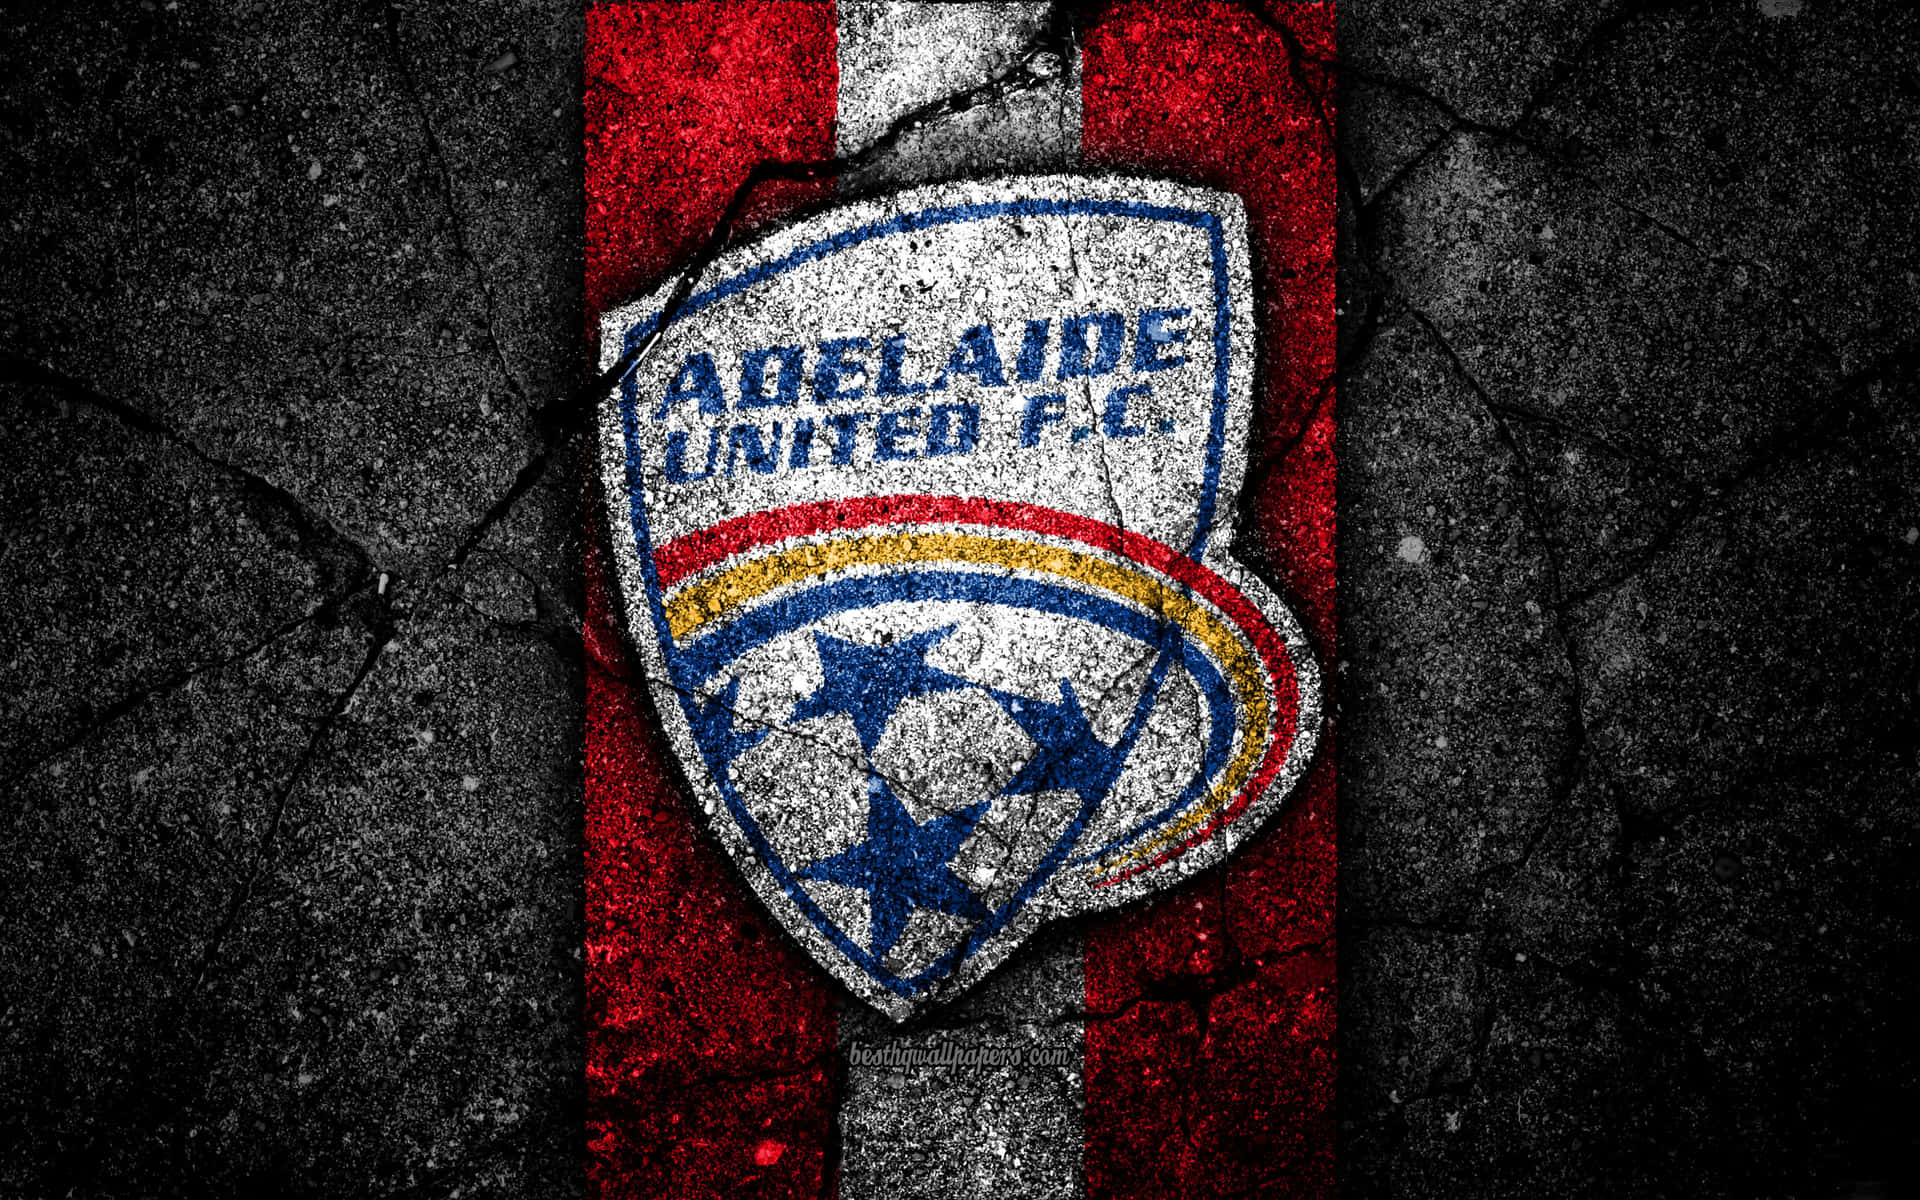 Adelaide United Football Team Action on the Field Wallpaper